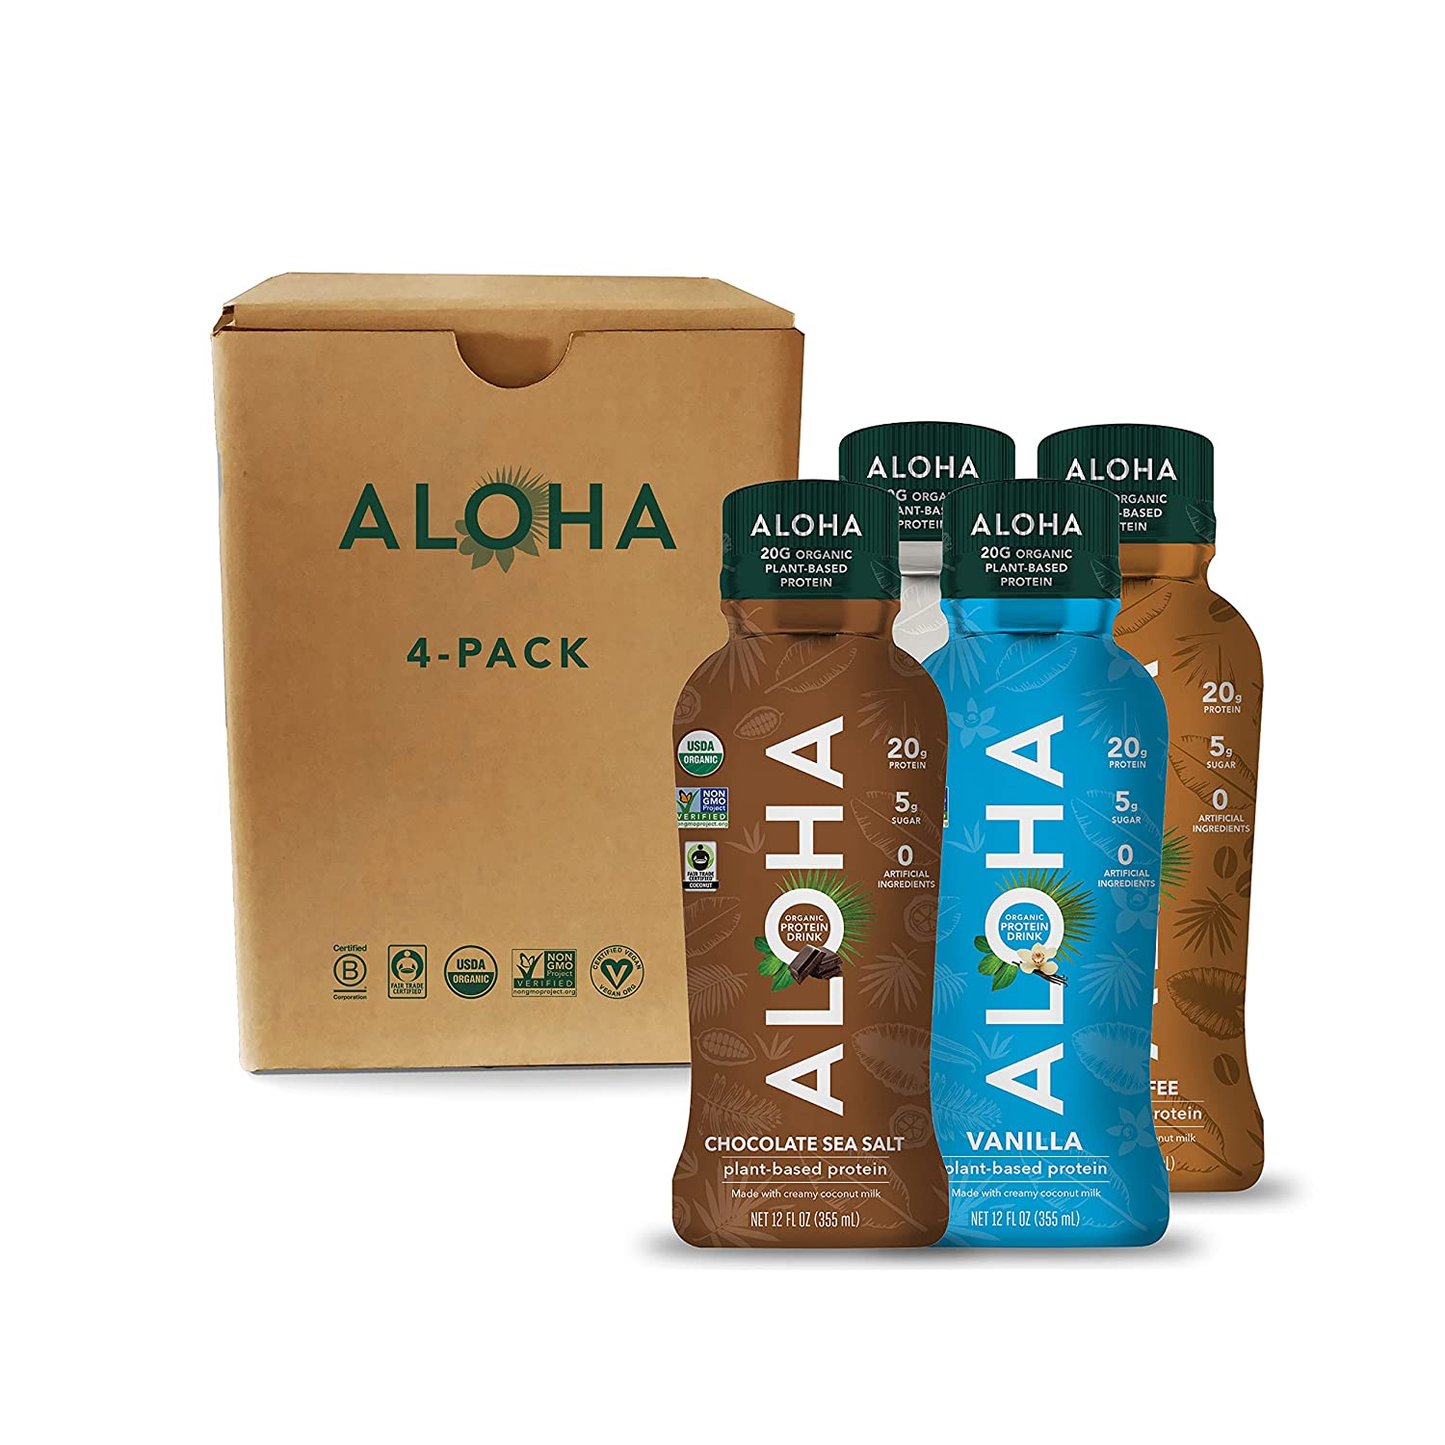 ALOHA Organic Plant Based Ready to Drink Protein Shake W/Mct Oil Variety Pack (4Ct, 12Oz Bottle) 20G Protein, Meal Replacement, Low Sugar & Carb, Gluten-Free, Paleo, Non-Gmo, No Soy, Stevia or Sugar Alcohol…